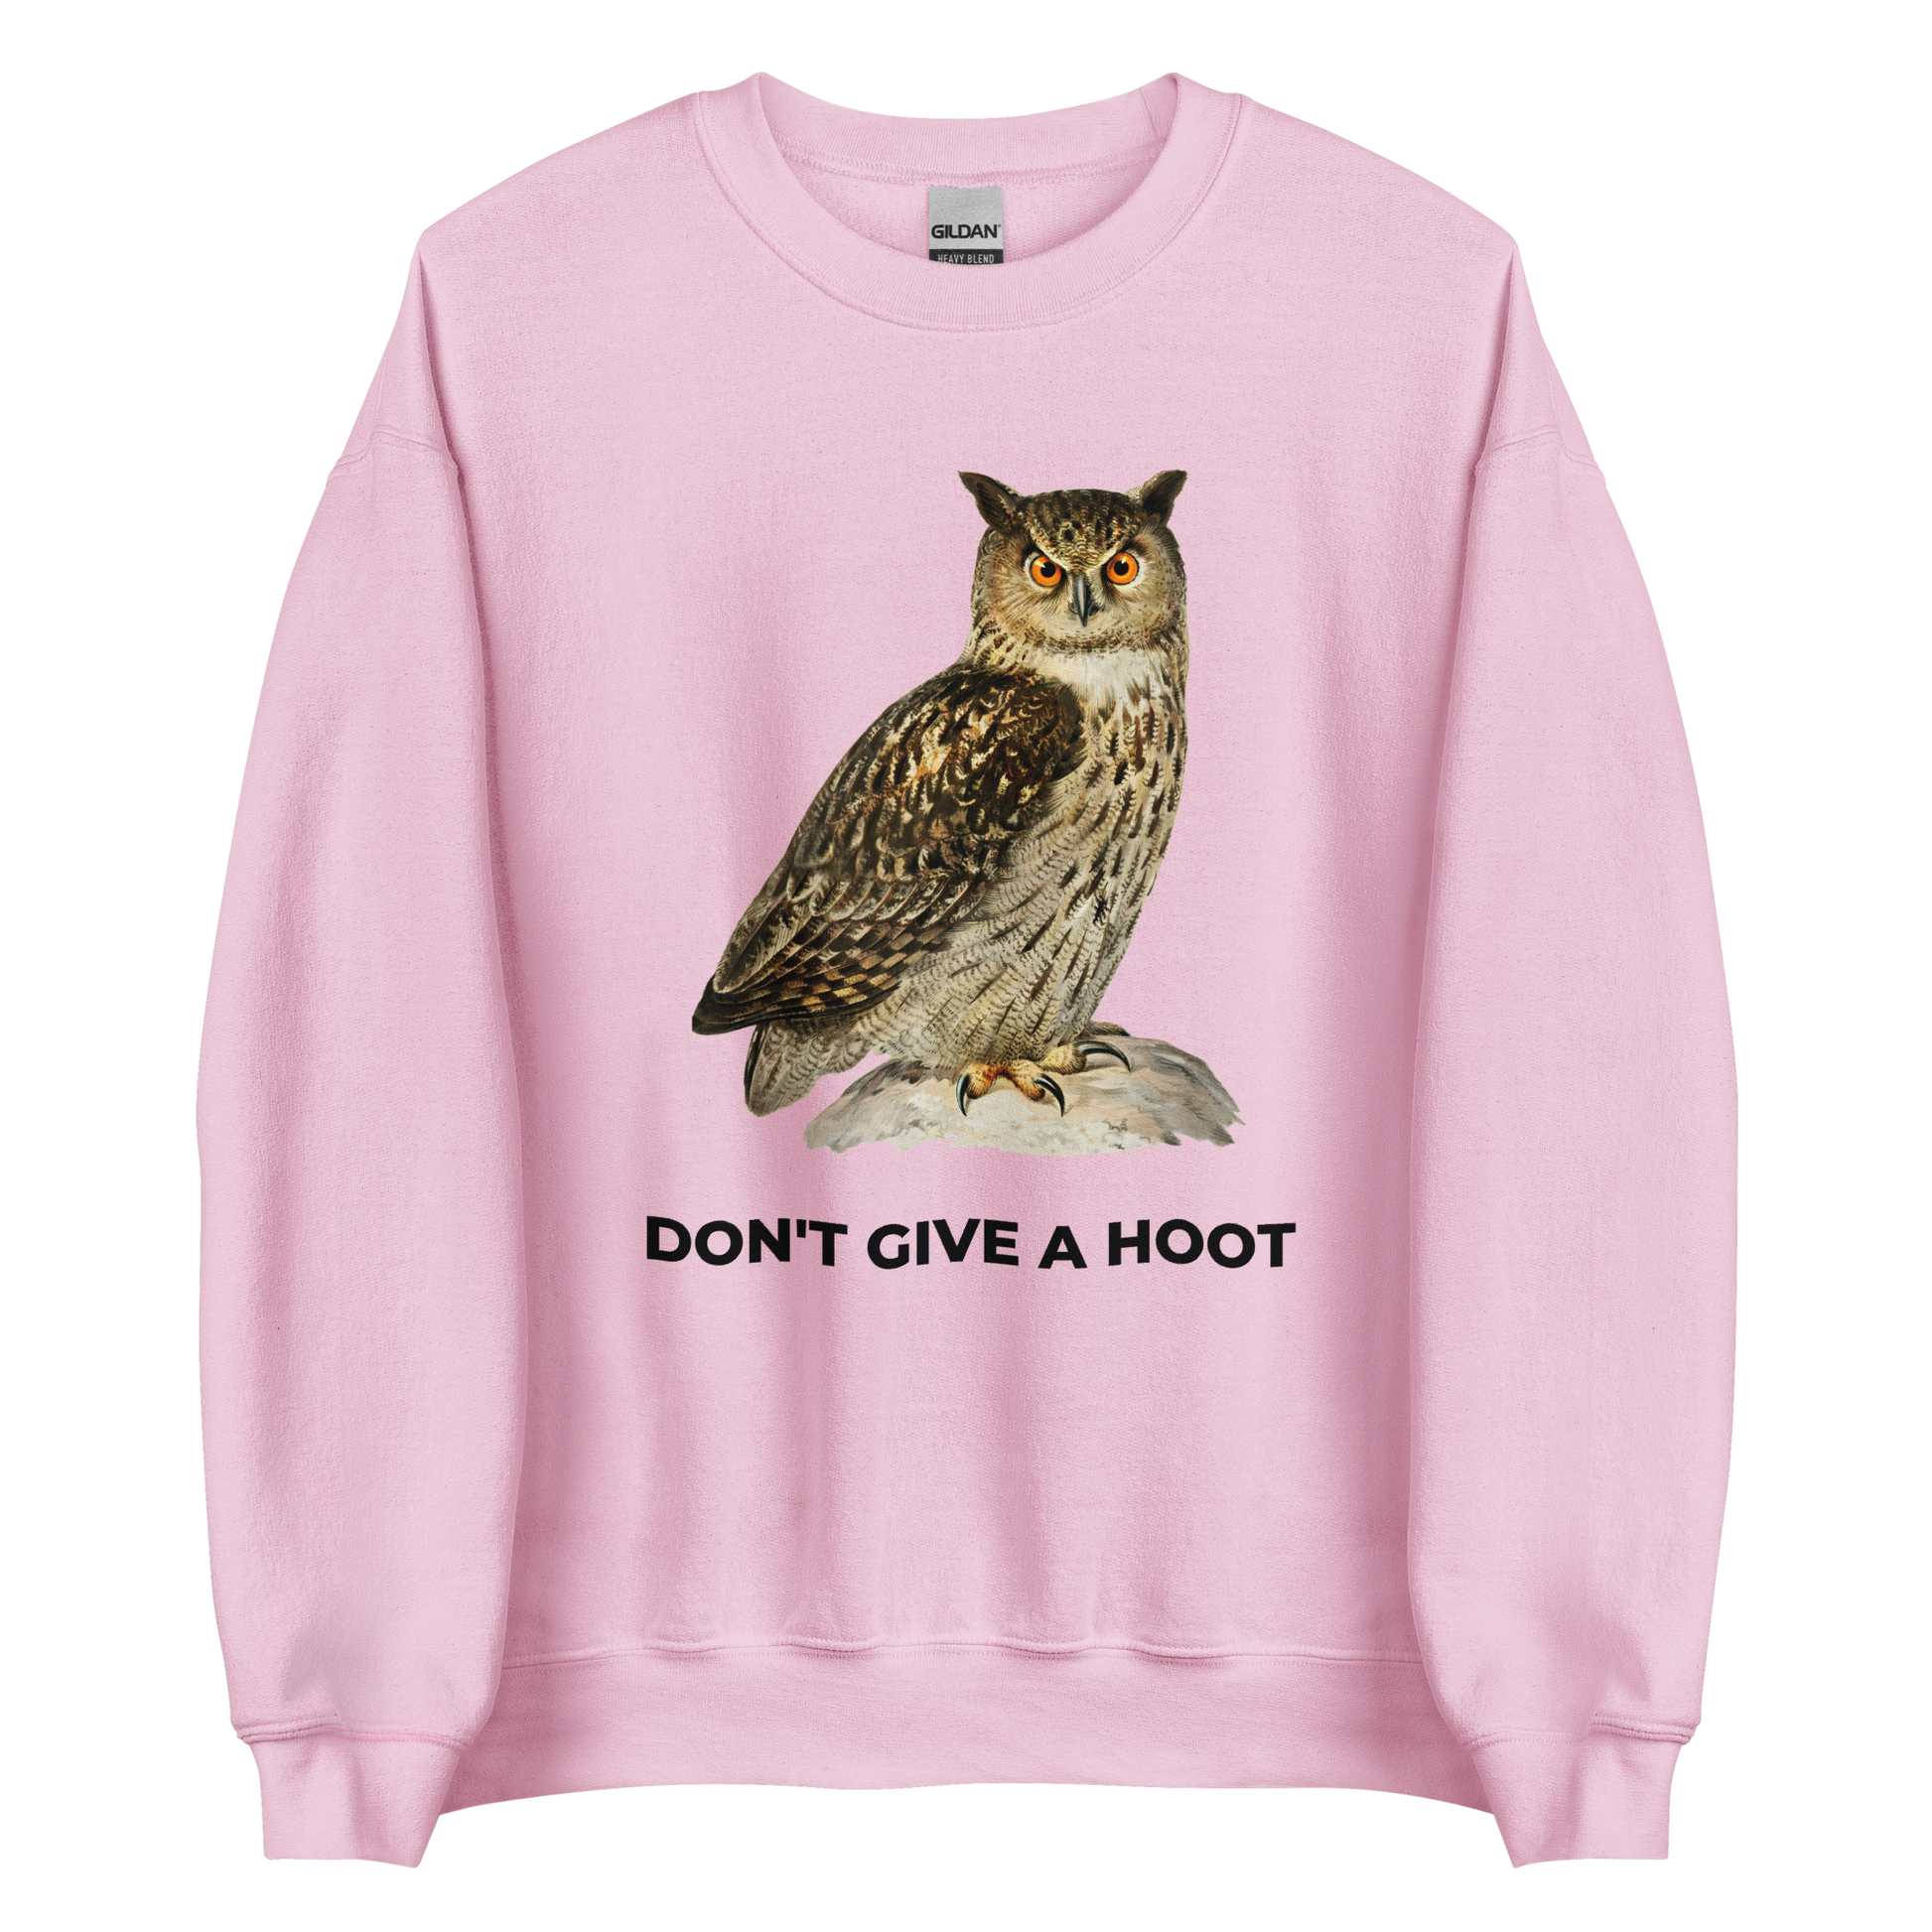 Light Pink Owl Sweatshirt featuring a captivating Don't Give a Hoot graphic on the chest - Funny Graphic Owl Sweatshirts - Boozy Fox